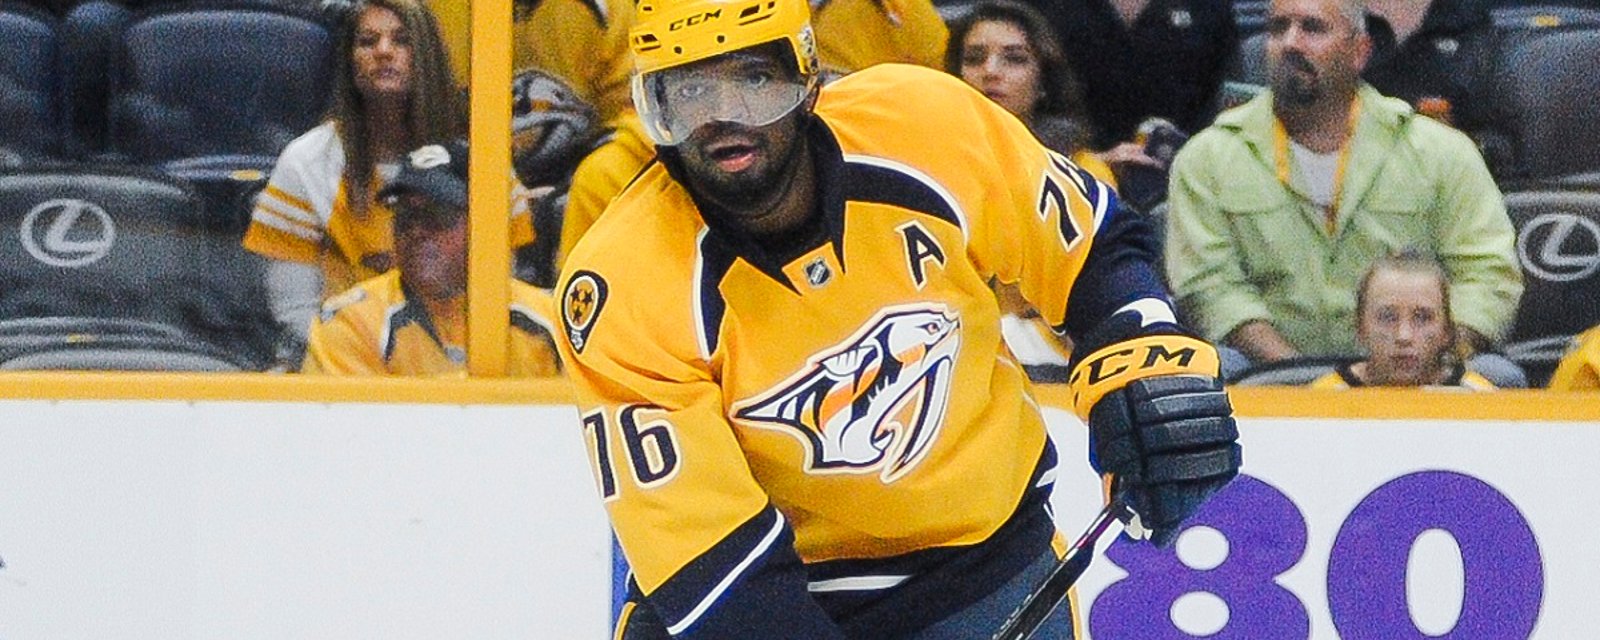 P.K. Subban finally speaks his mind about the trade from Montreal.